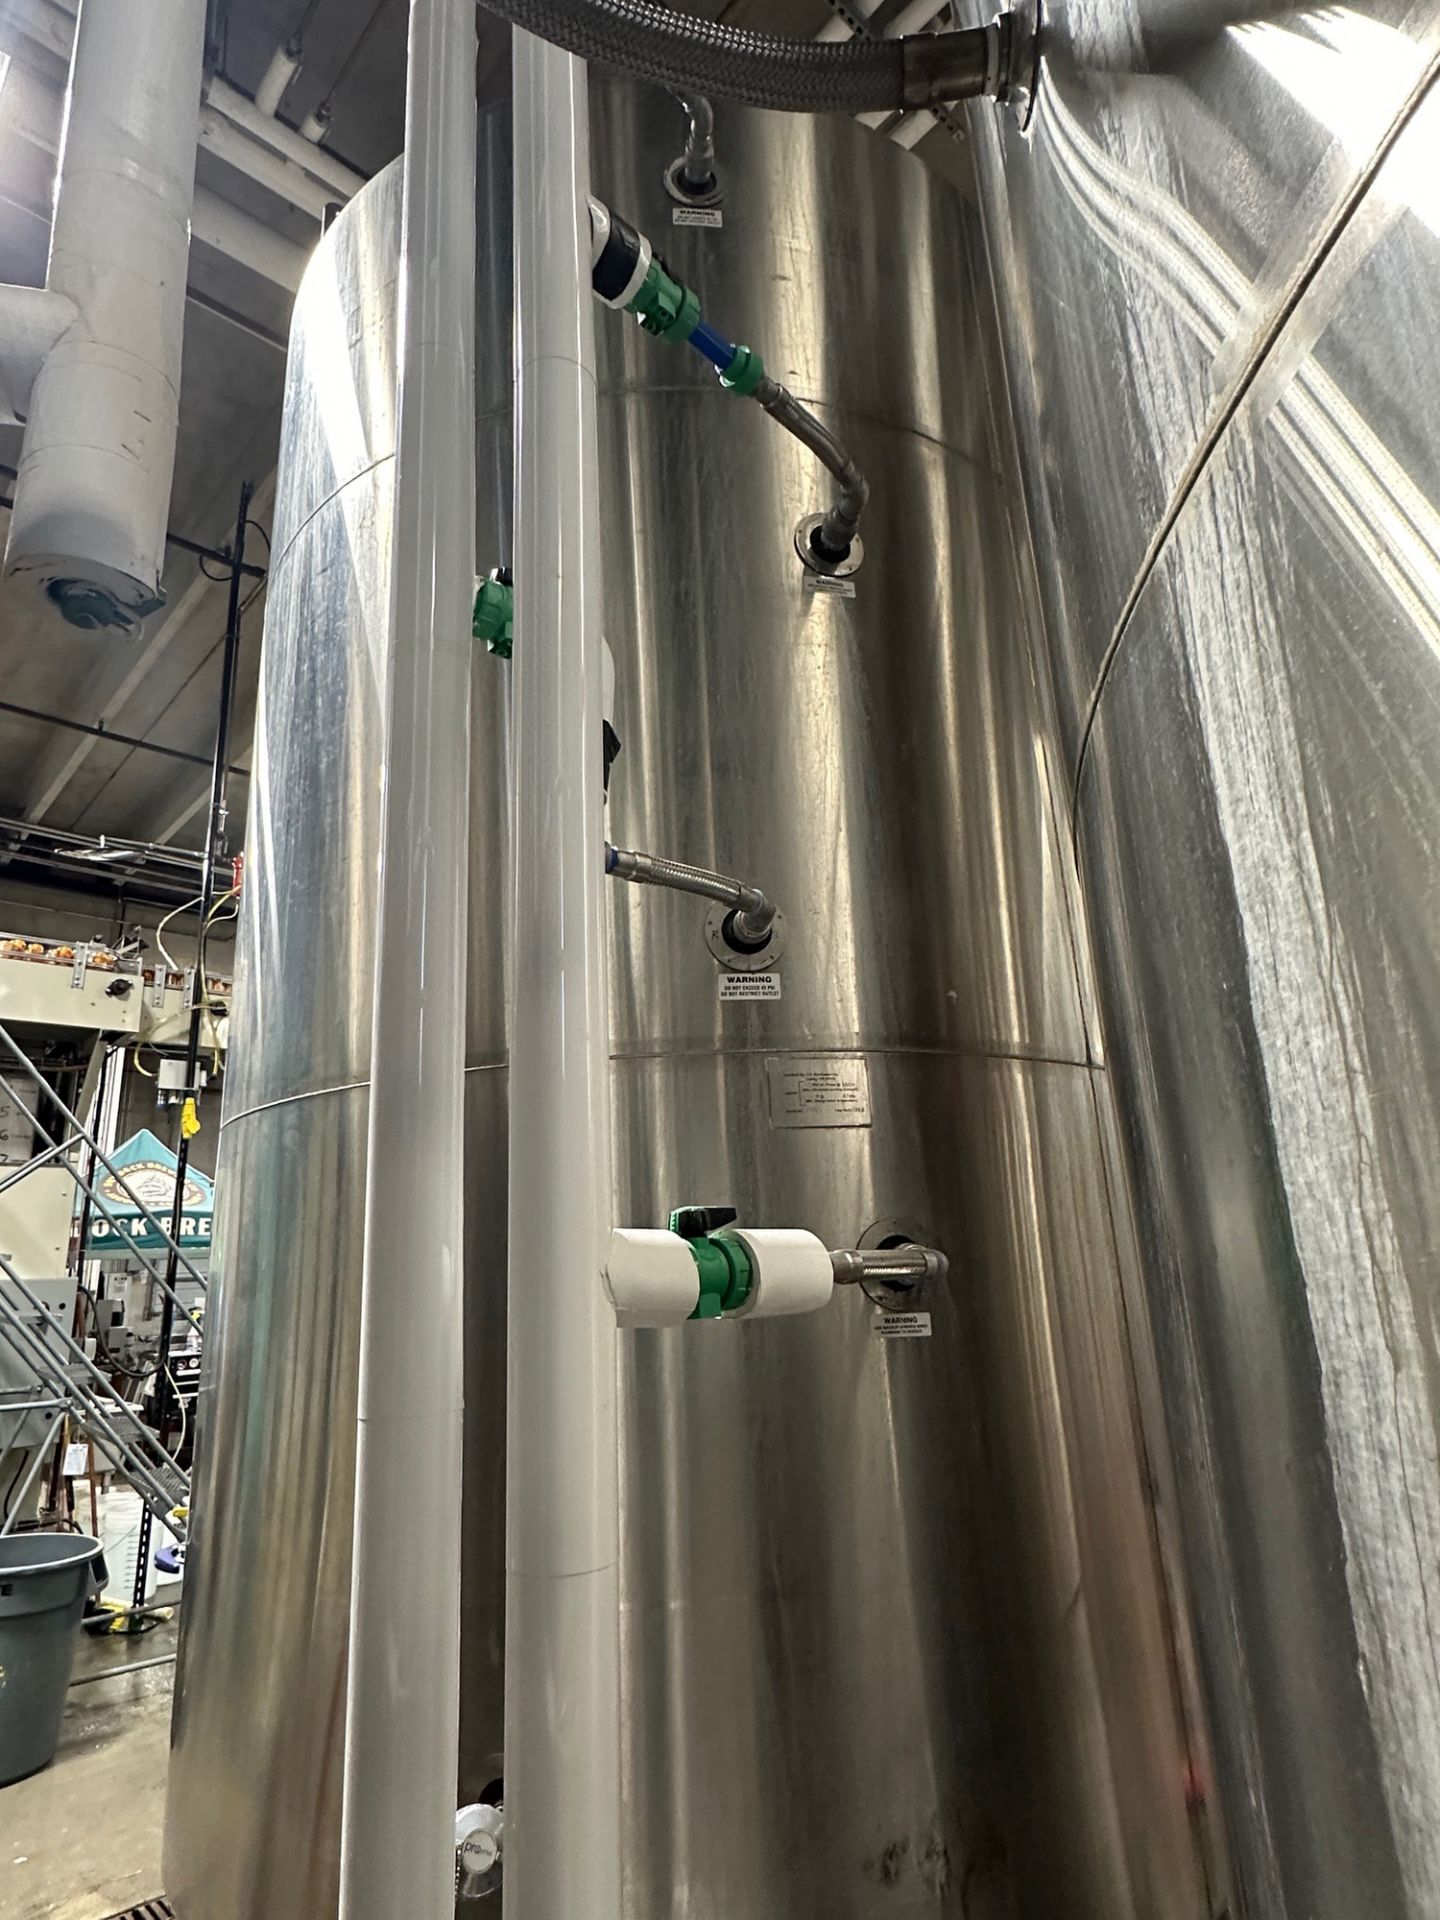 JVNW 80 BBL Stainless Steel Brite Tank - Dish Bottom, Glycol Jacketed, Mandoor, Car | Rig Fee $1850 - Image 3 of 7